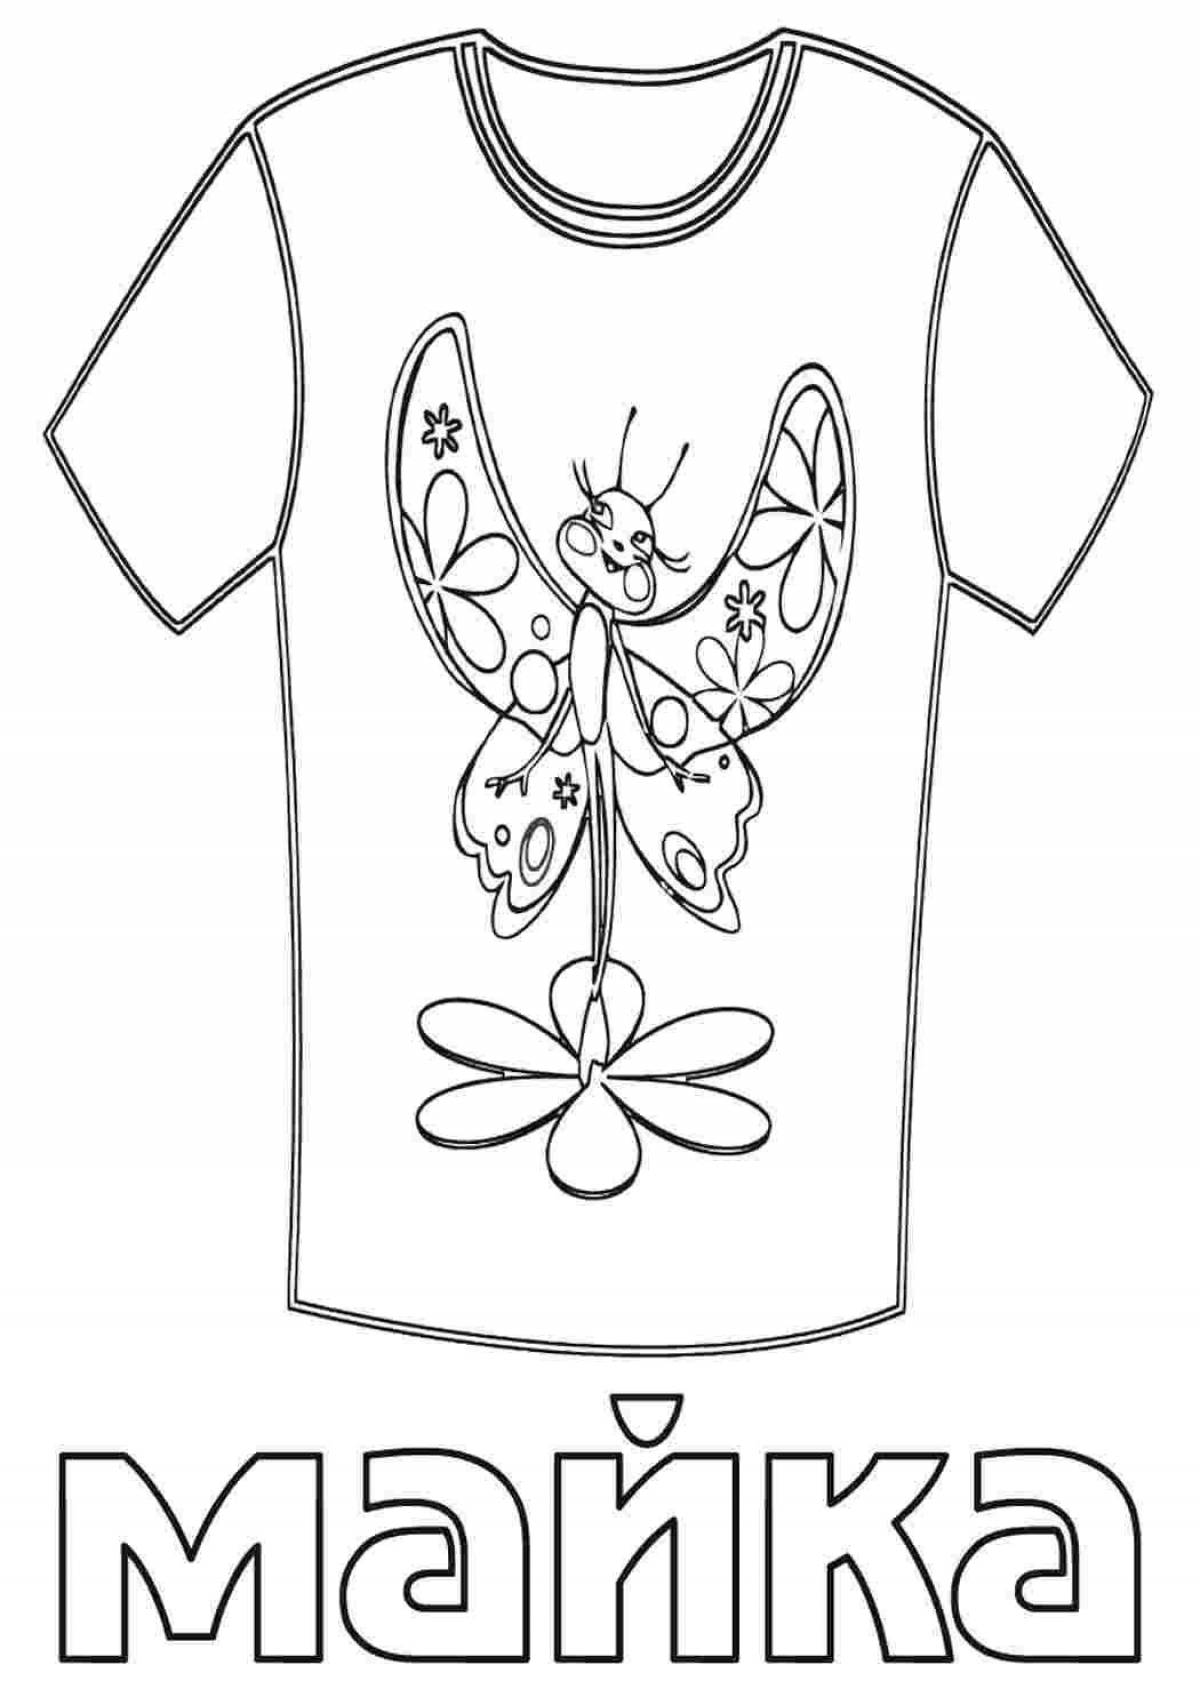 Special t-shirt coloring page